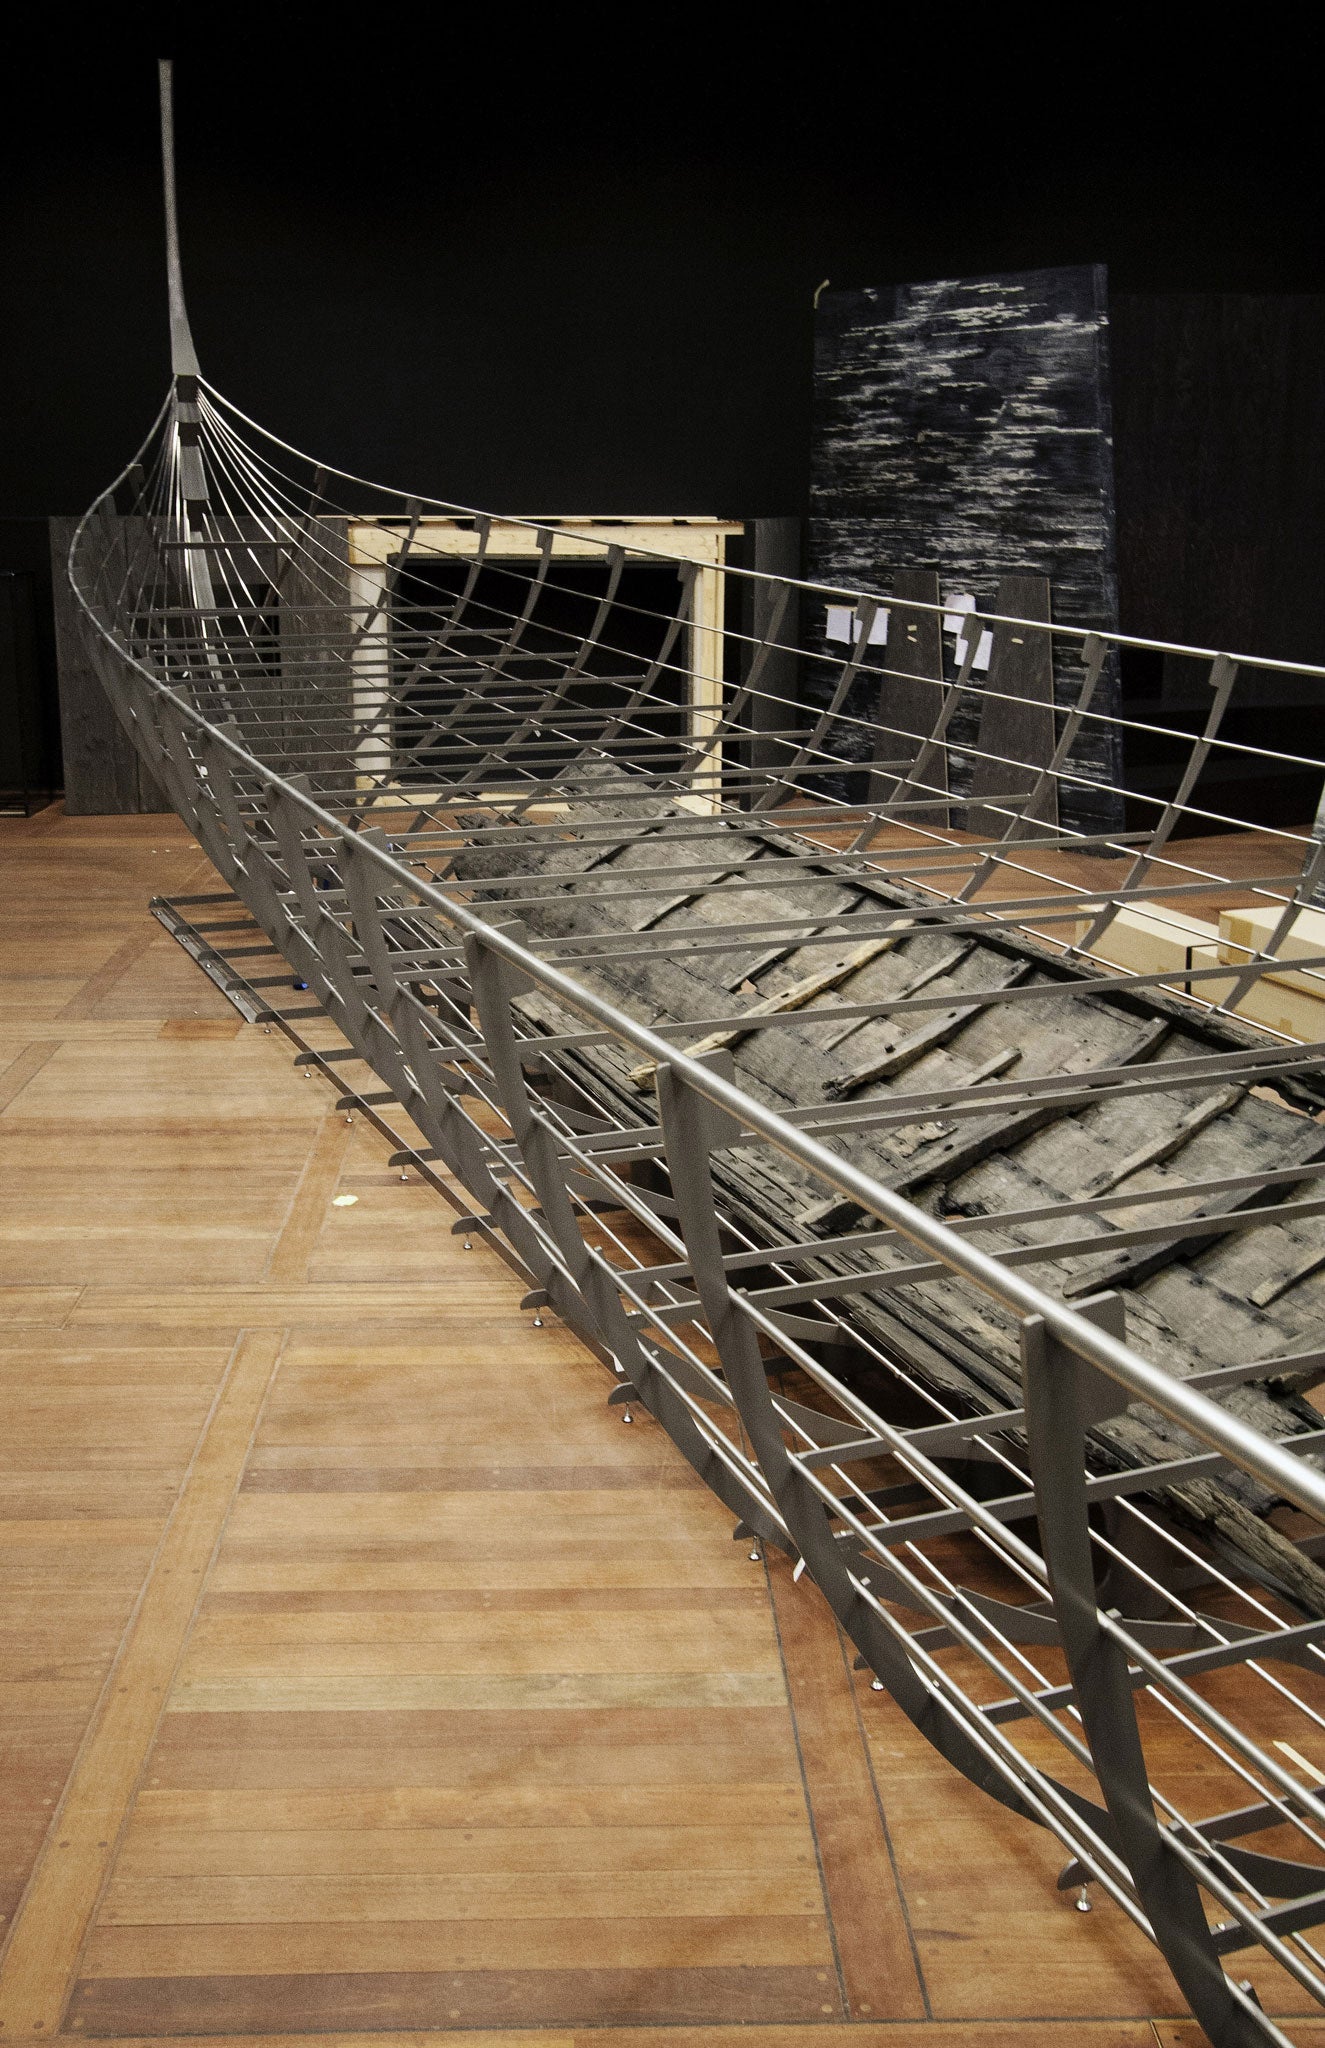 A 37m-long Viking warship is coming to the British Museum